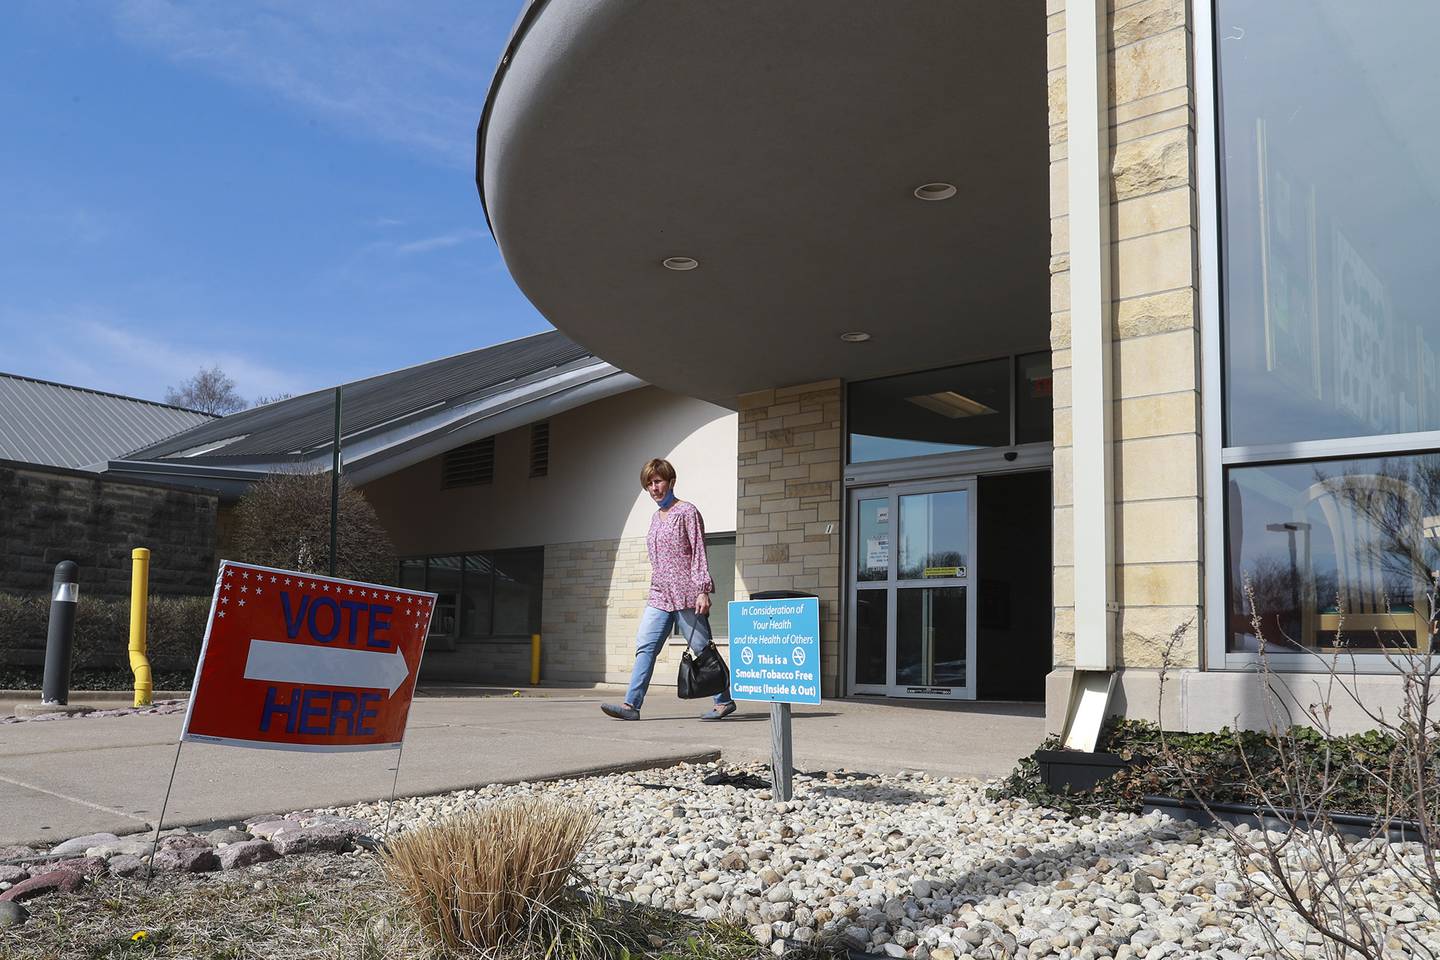 A voter leaves the polls on Tuesday, April 6, 2021, at the Joliet Public Library Black Road branch in Joliet, Ill.